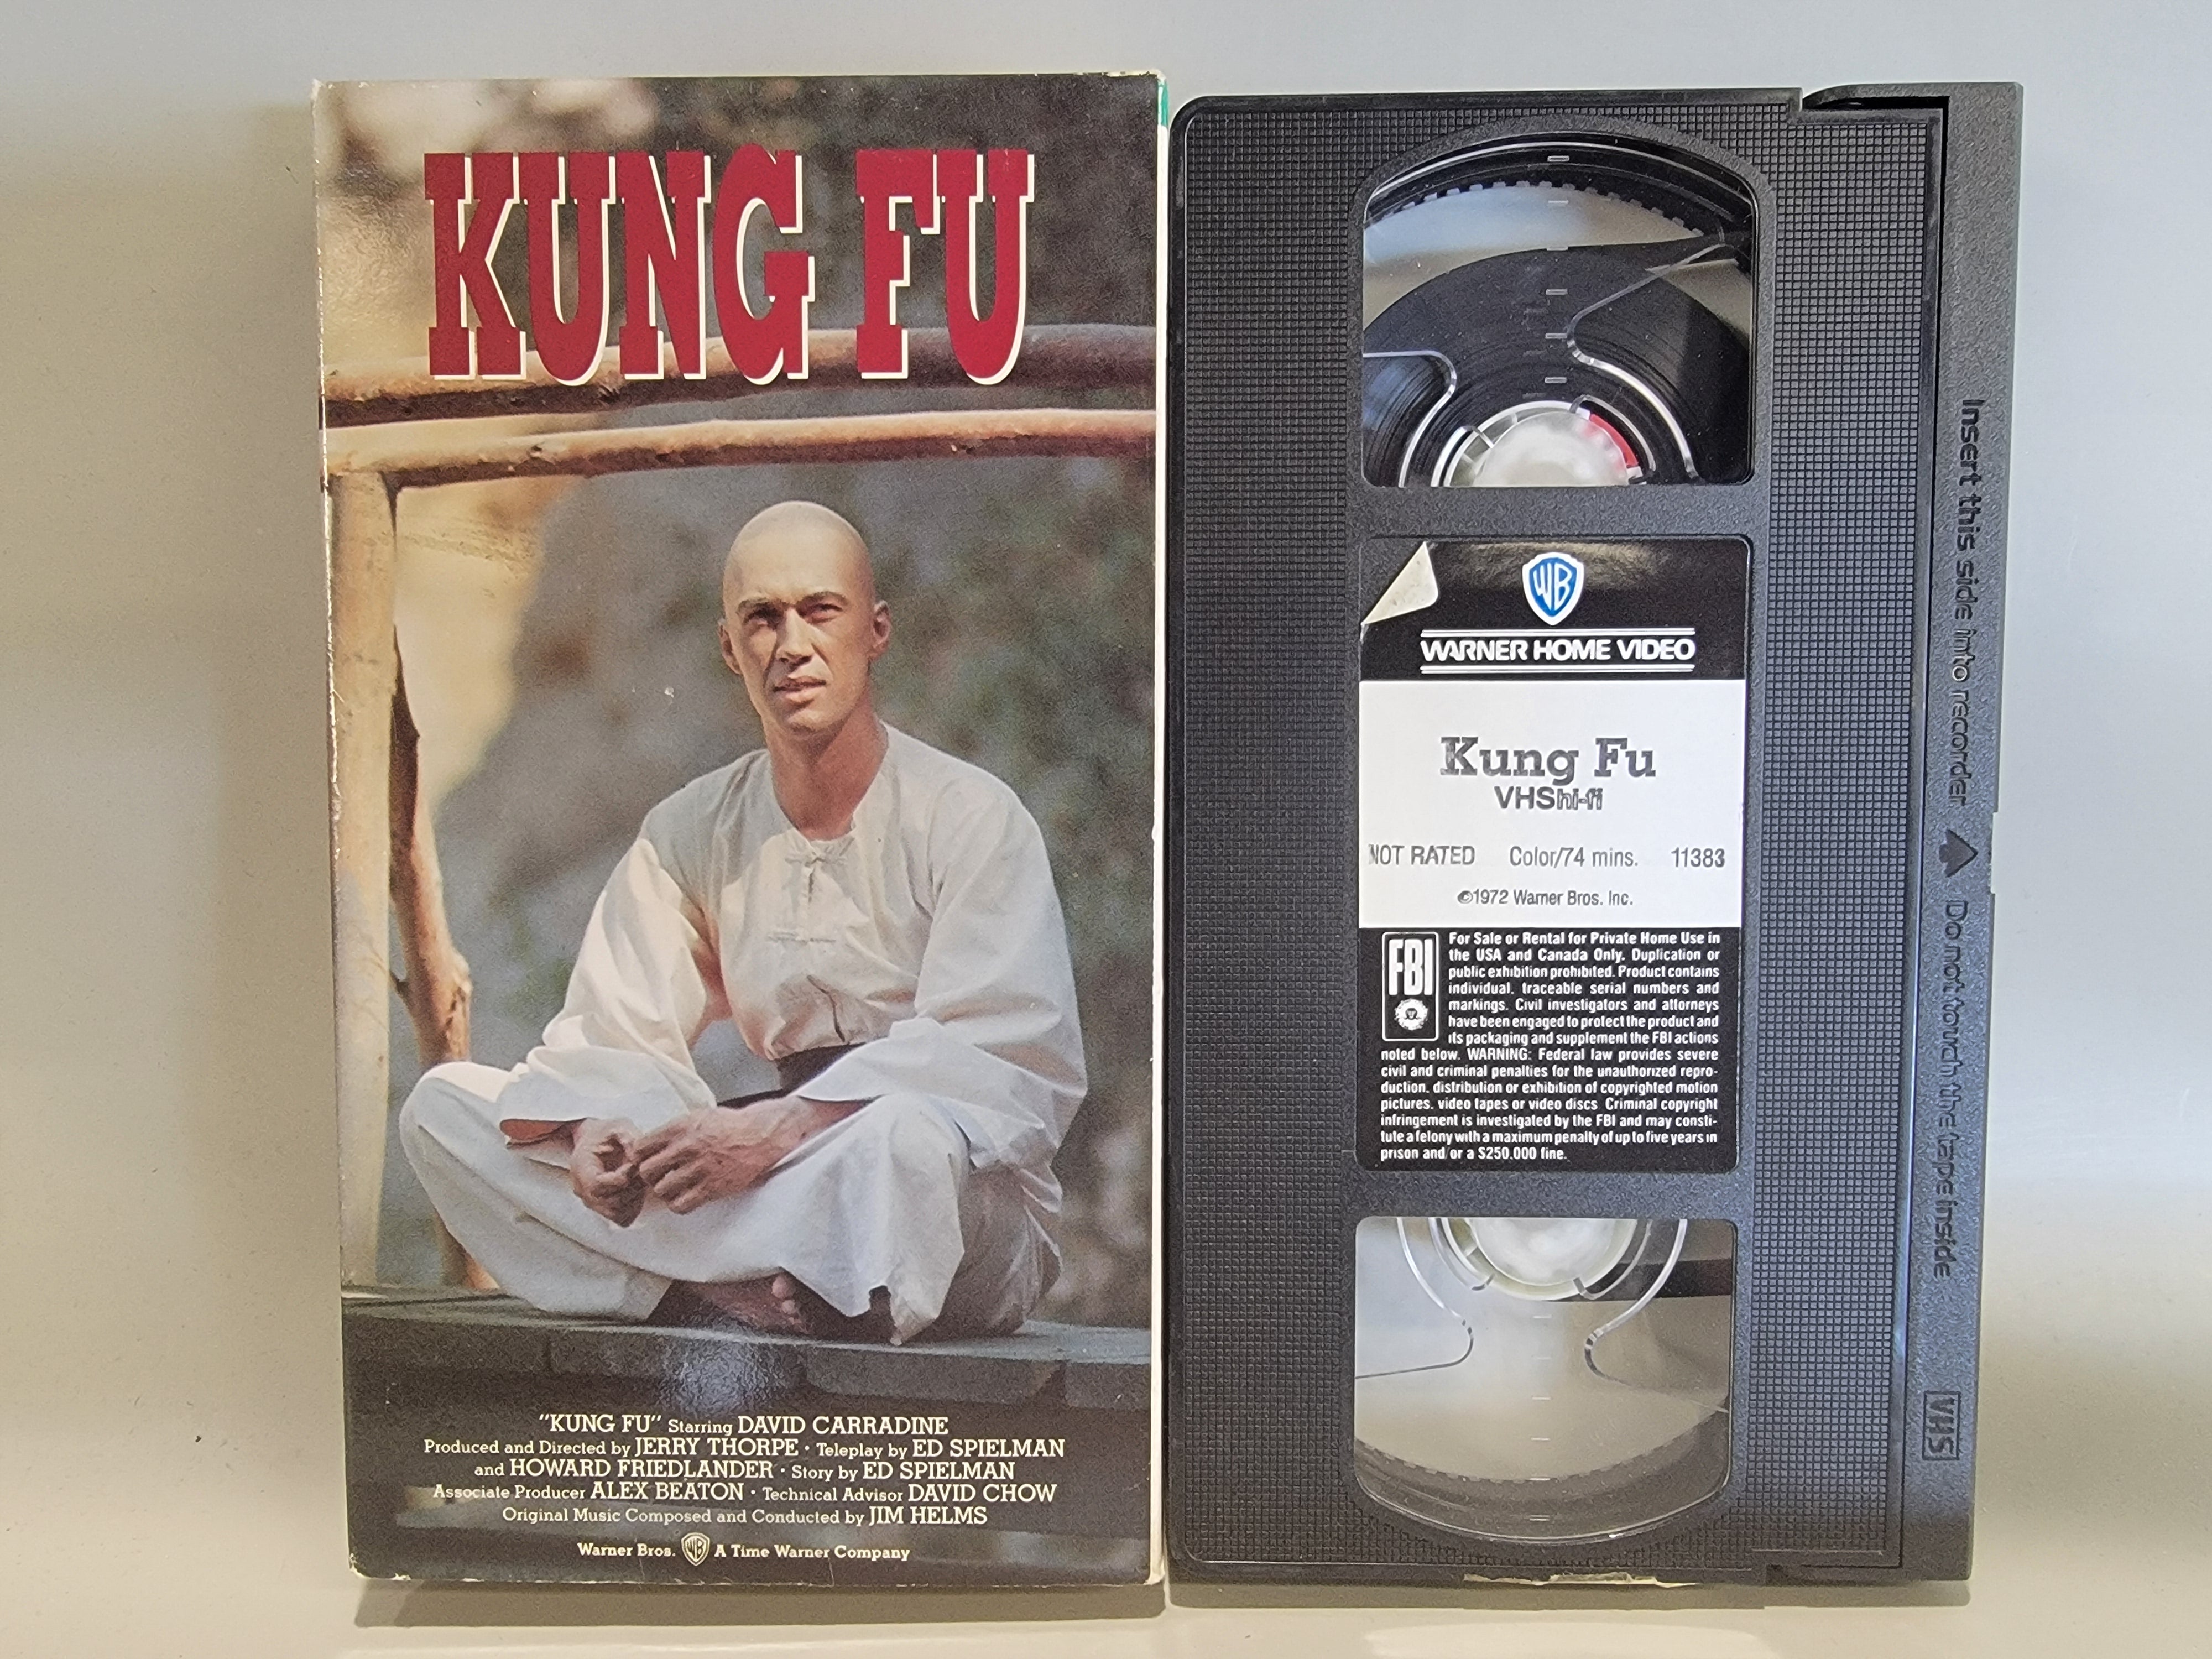 KUNG FU VHS [USED]